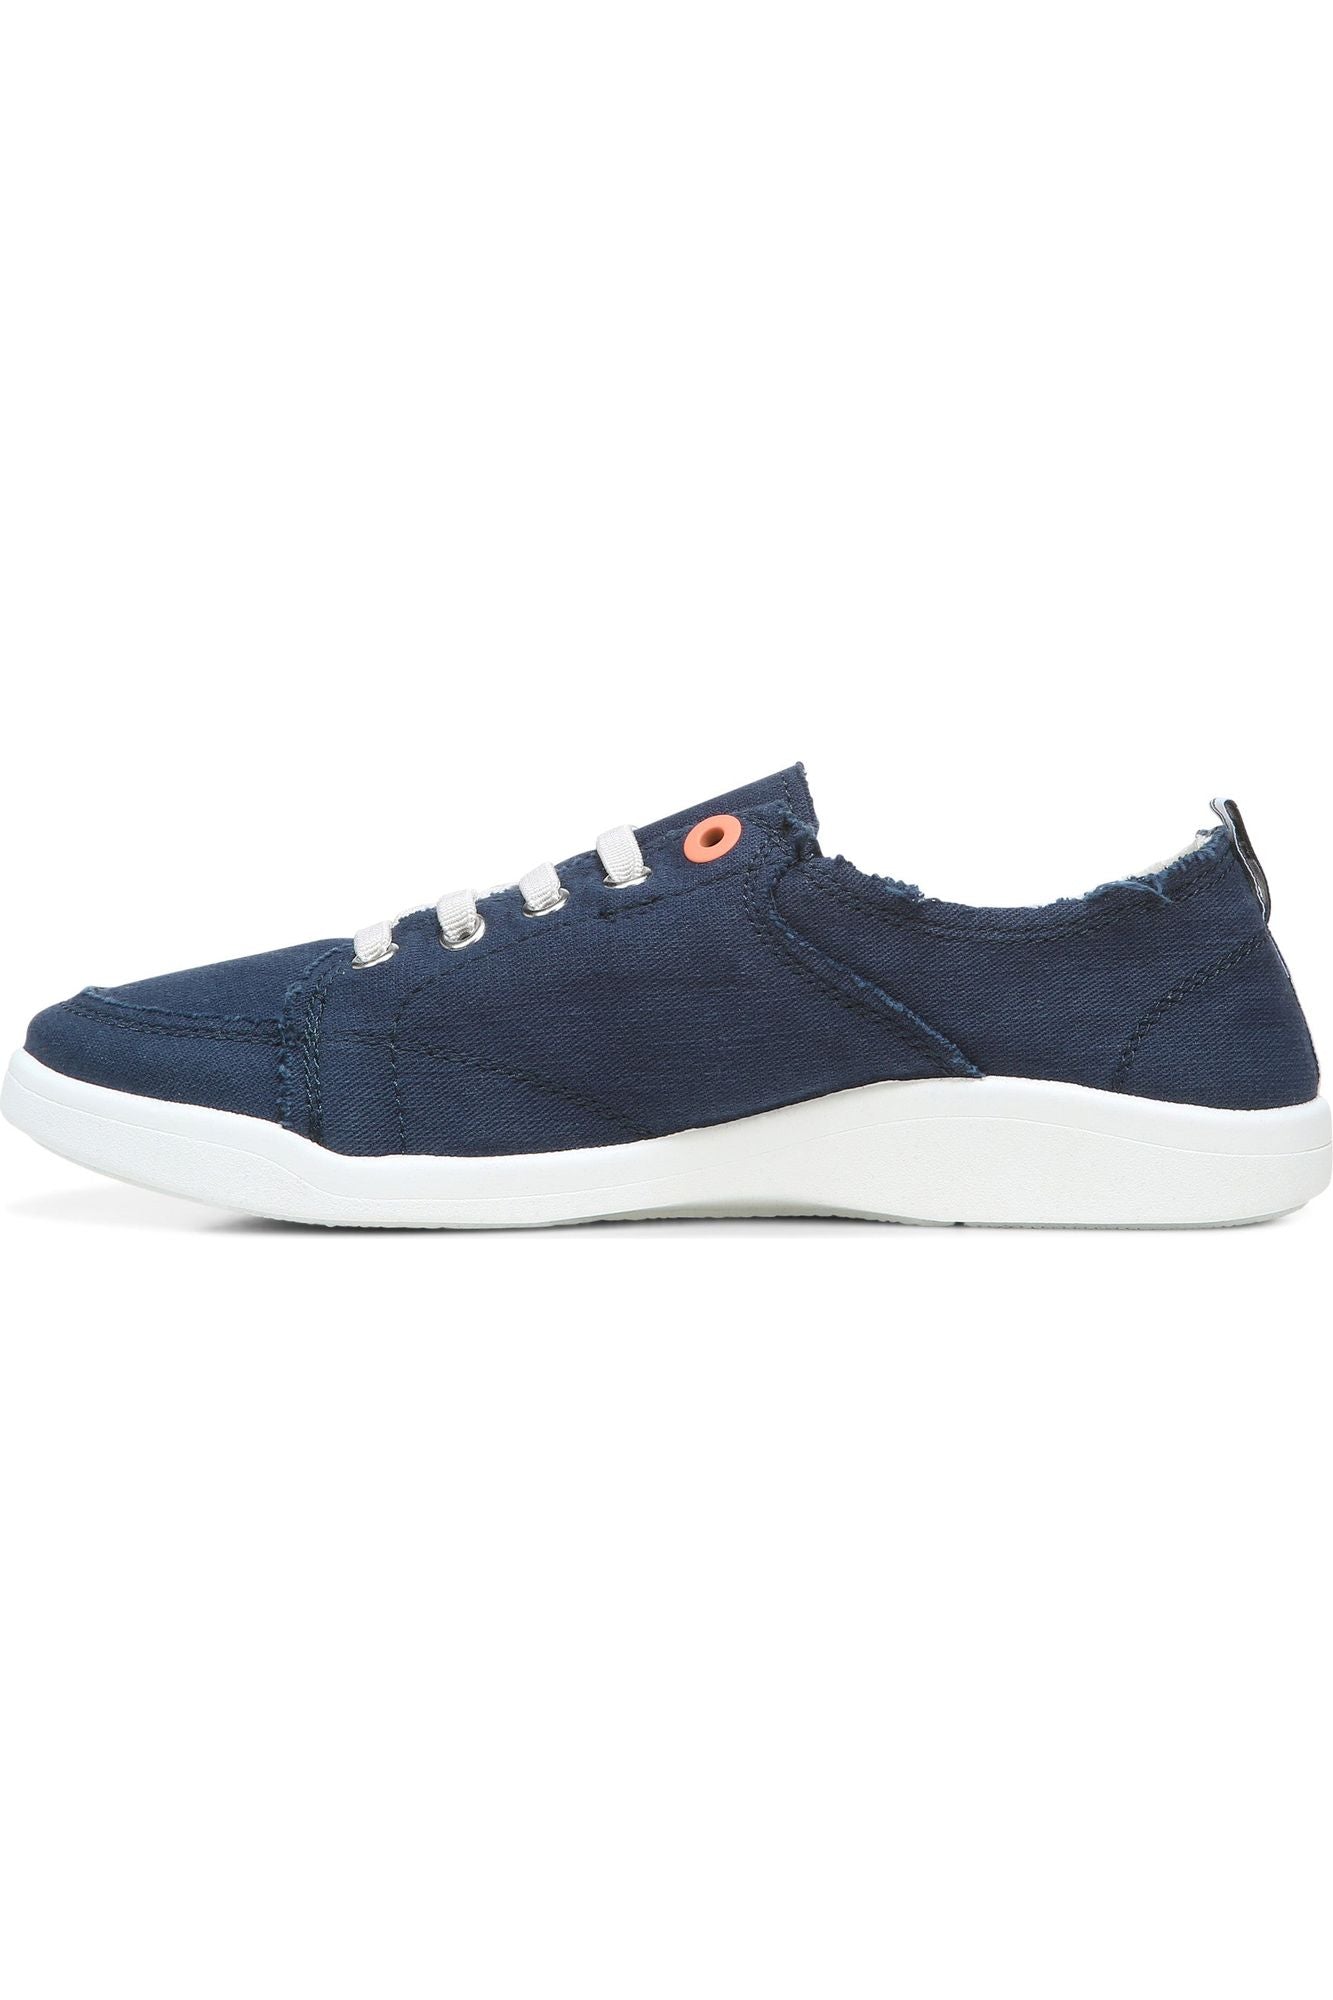 Vionic Canvas Lace-Up Sneaker - Style Pismo NAV, side3